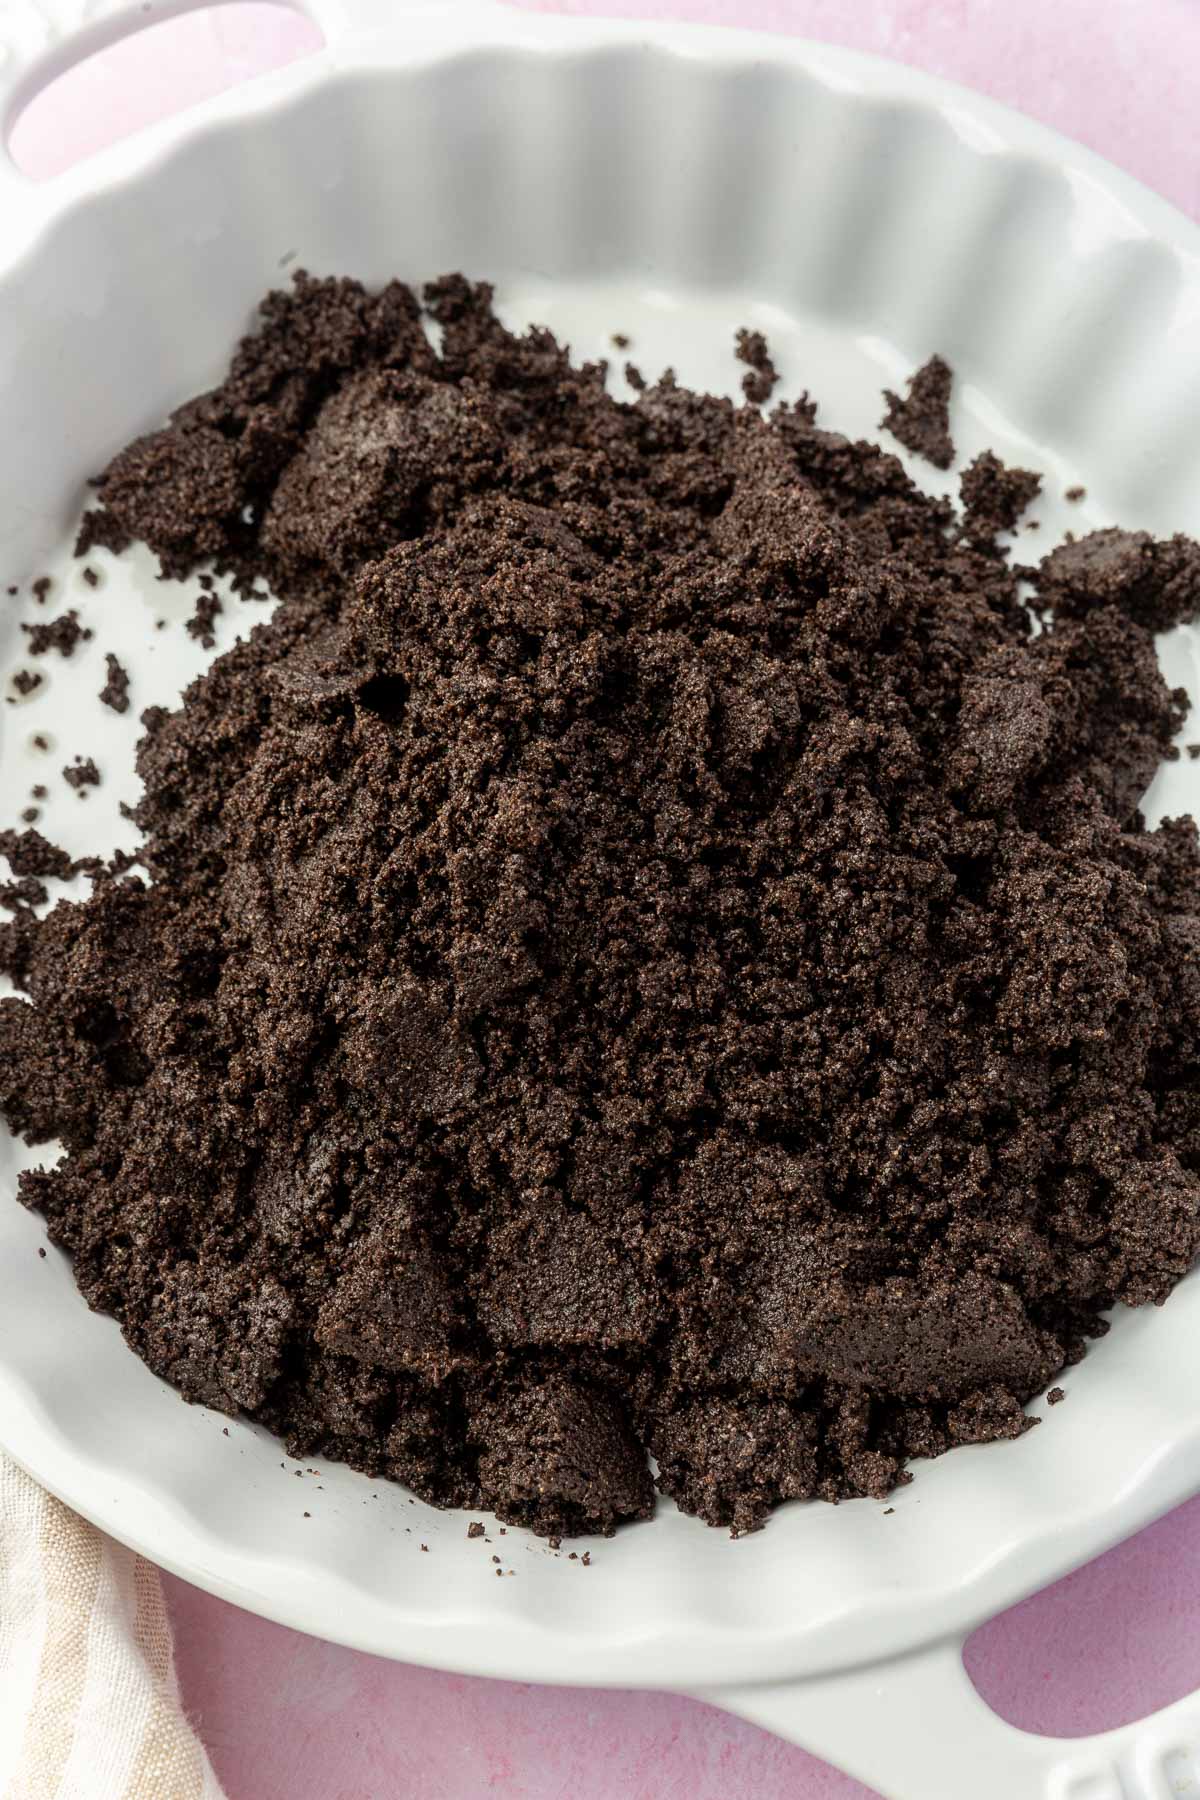 A mound of gluten-free Oreo crumbles in a white tart pan before pressing into an even layer.